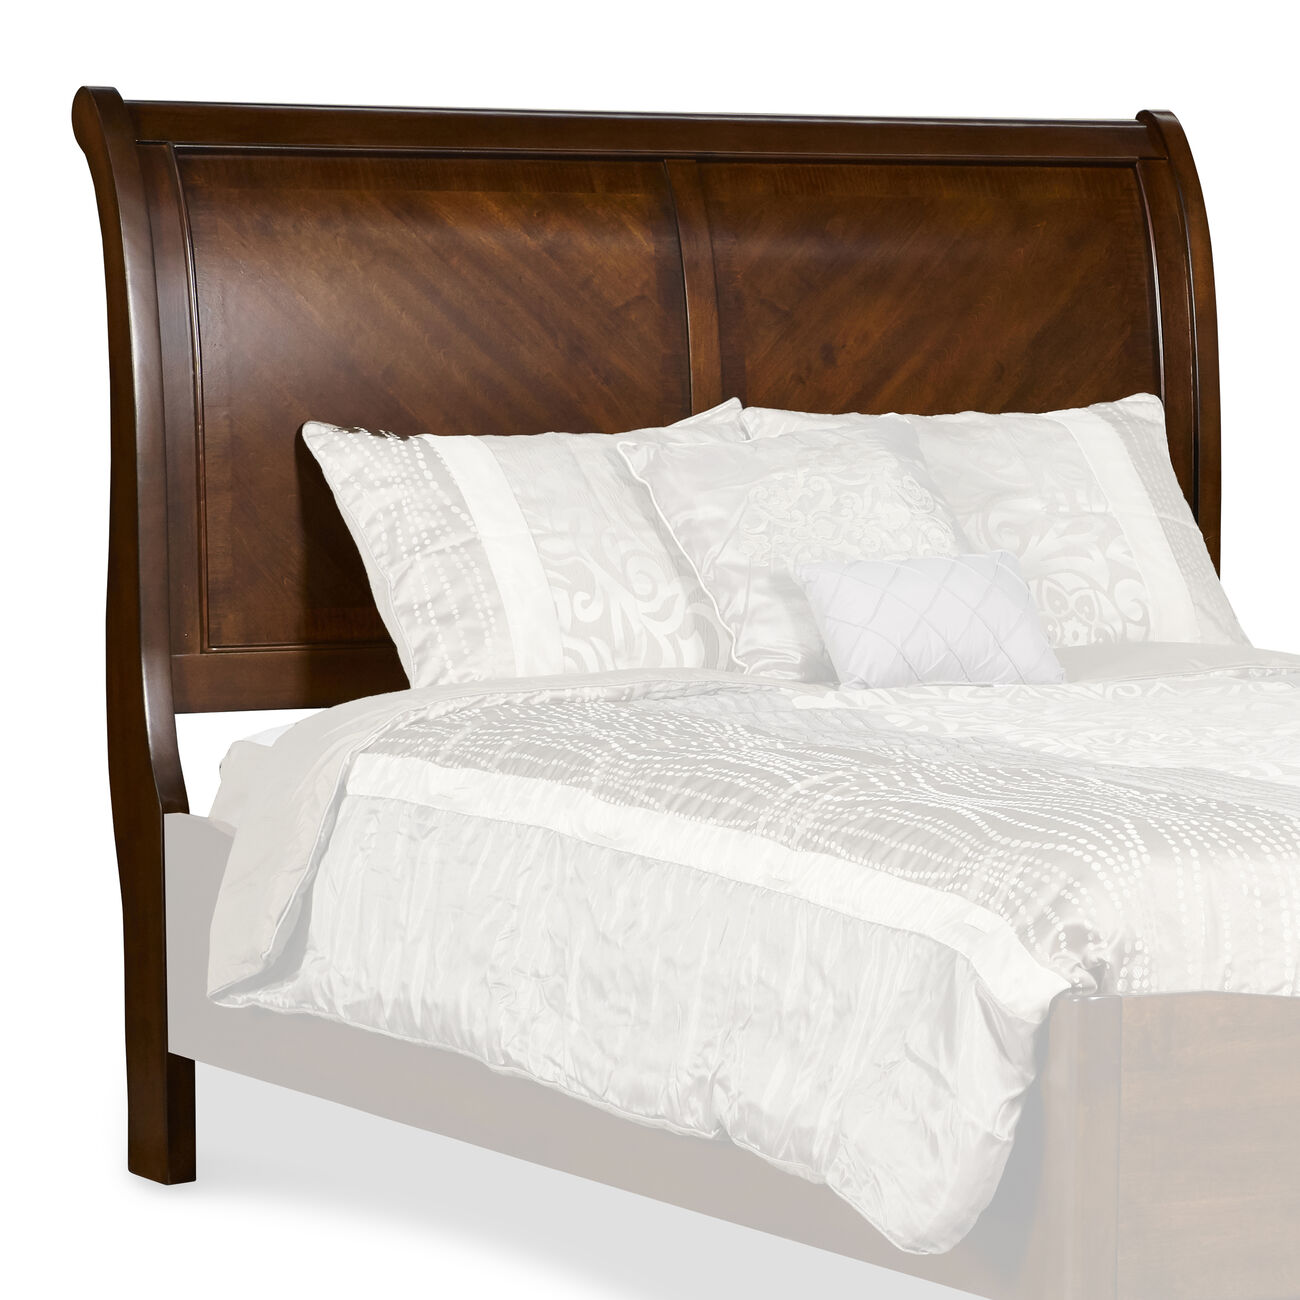 Eastern King Size Wooden Sleigh Headboard with Curved Back , Brown